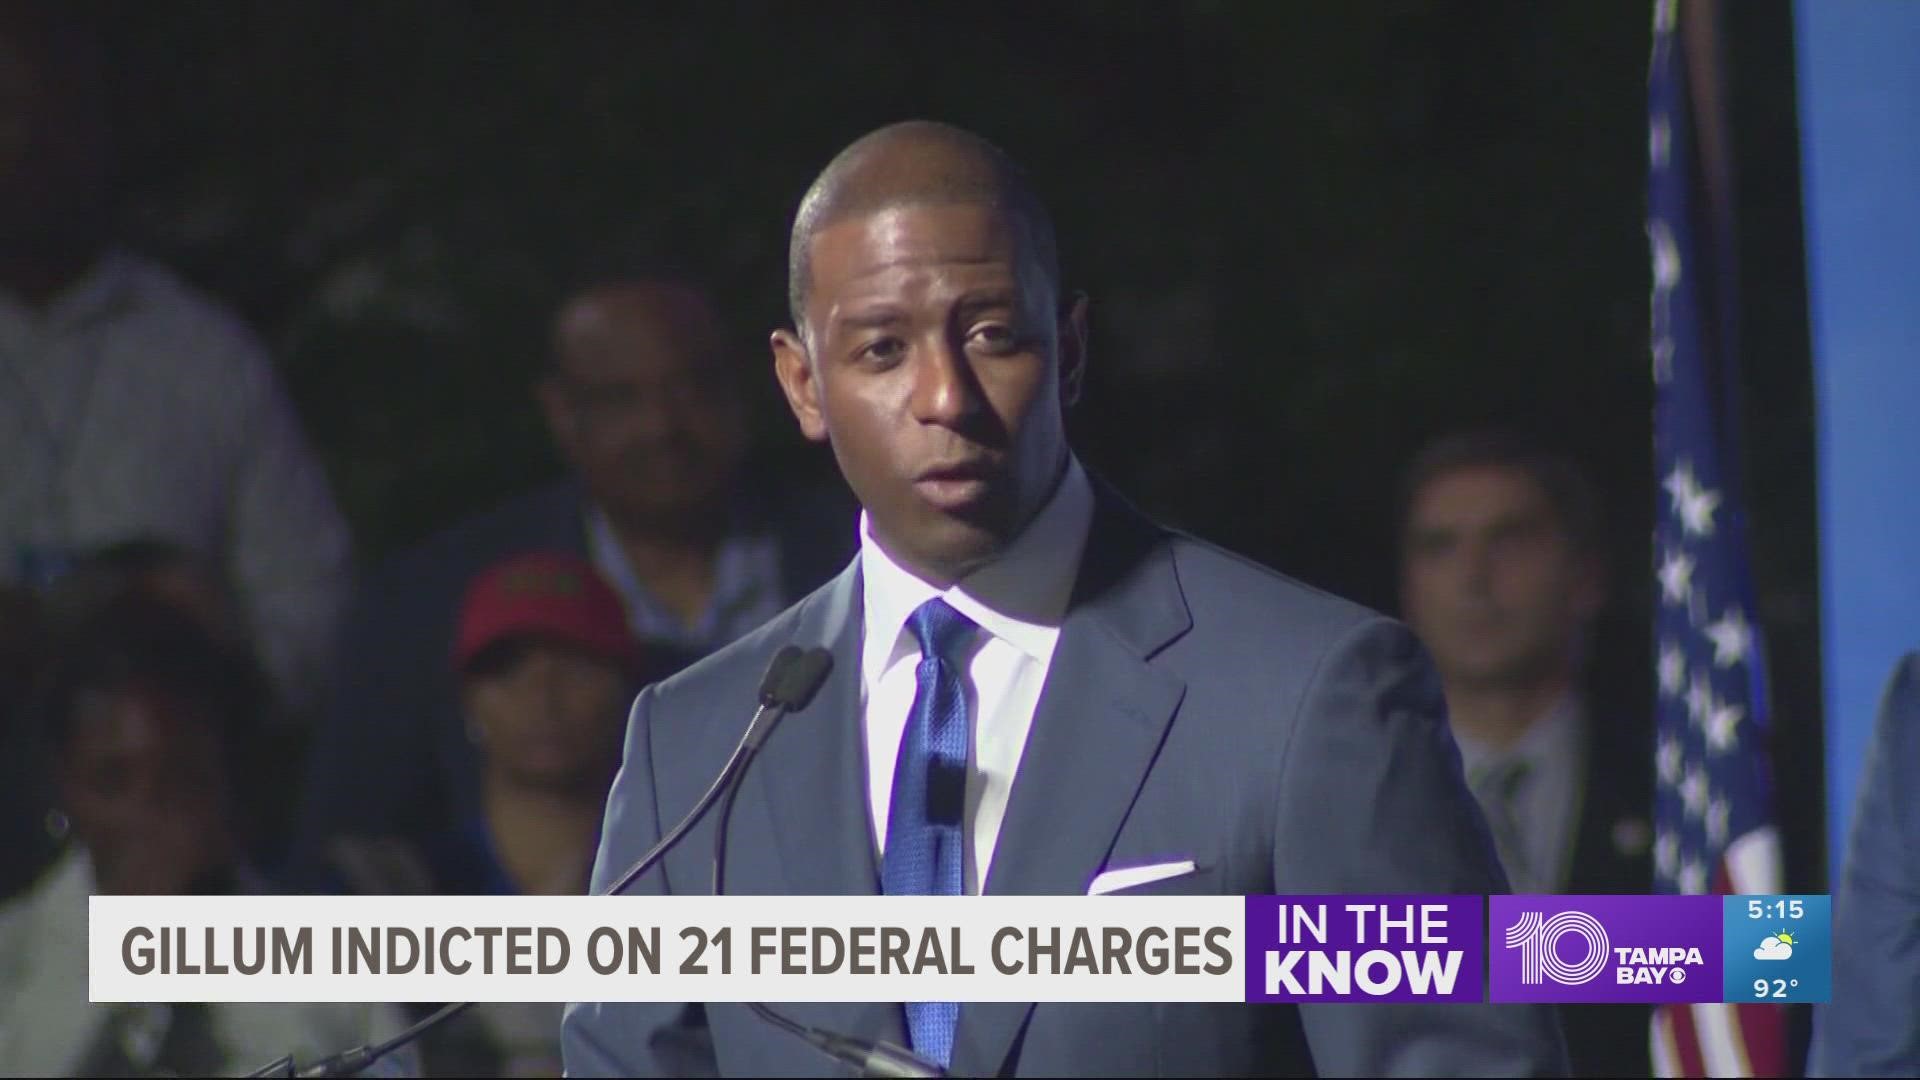 Gillum is facing 21 federal charges related to a scheme to seek donations and funnel a portion of them back to him through third parties, the U.S. Attorney's Office.